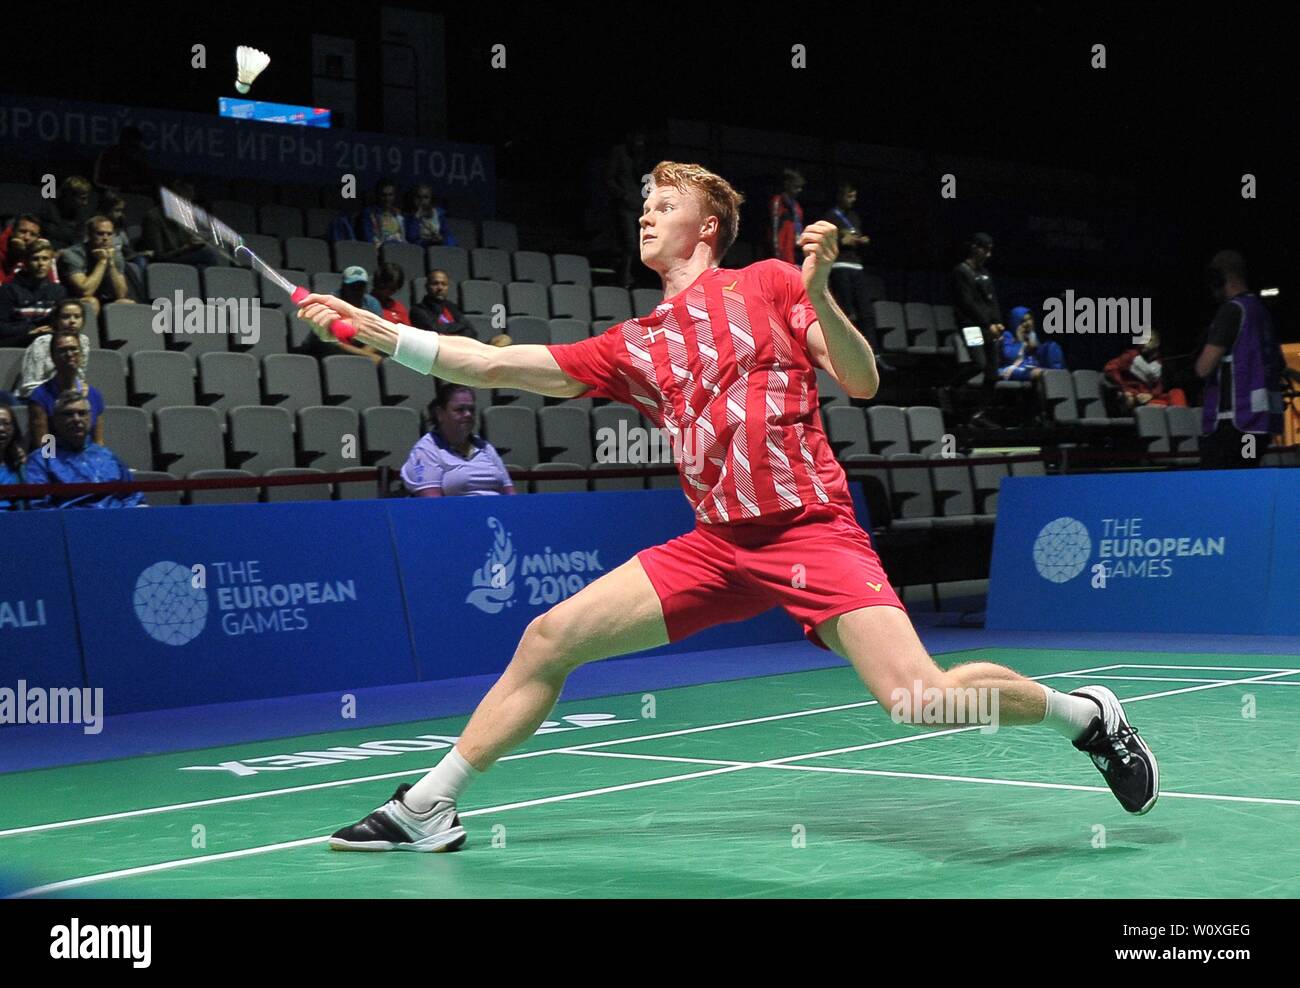 Minsk, Belarus. 28th June, 2019. Anders Antonsen (DEN) taking part in the  Badminton tournament at the 2nd European games. Credit Garry Bowden/SIP  photo agency/Alamy live news Stock Photo - Alamy